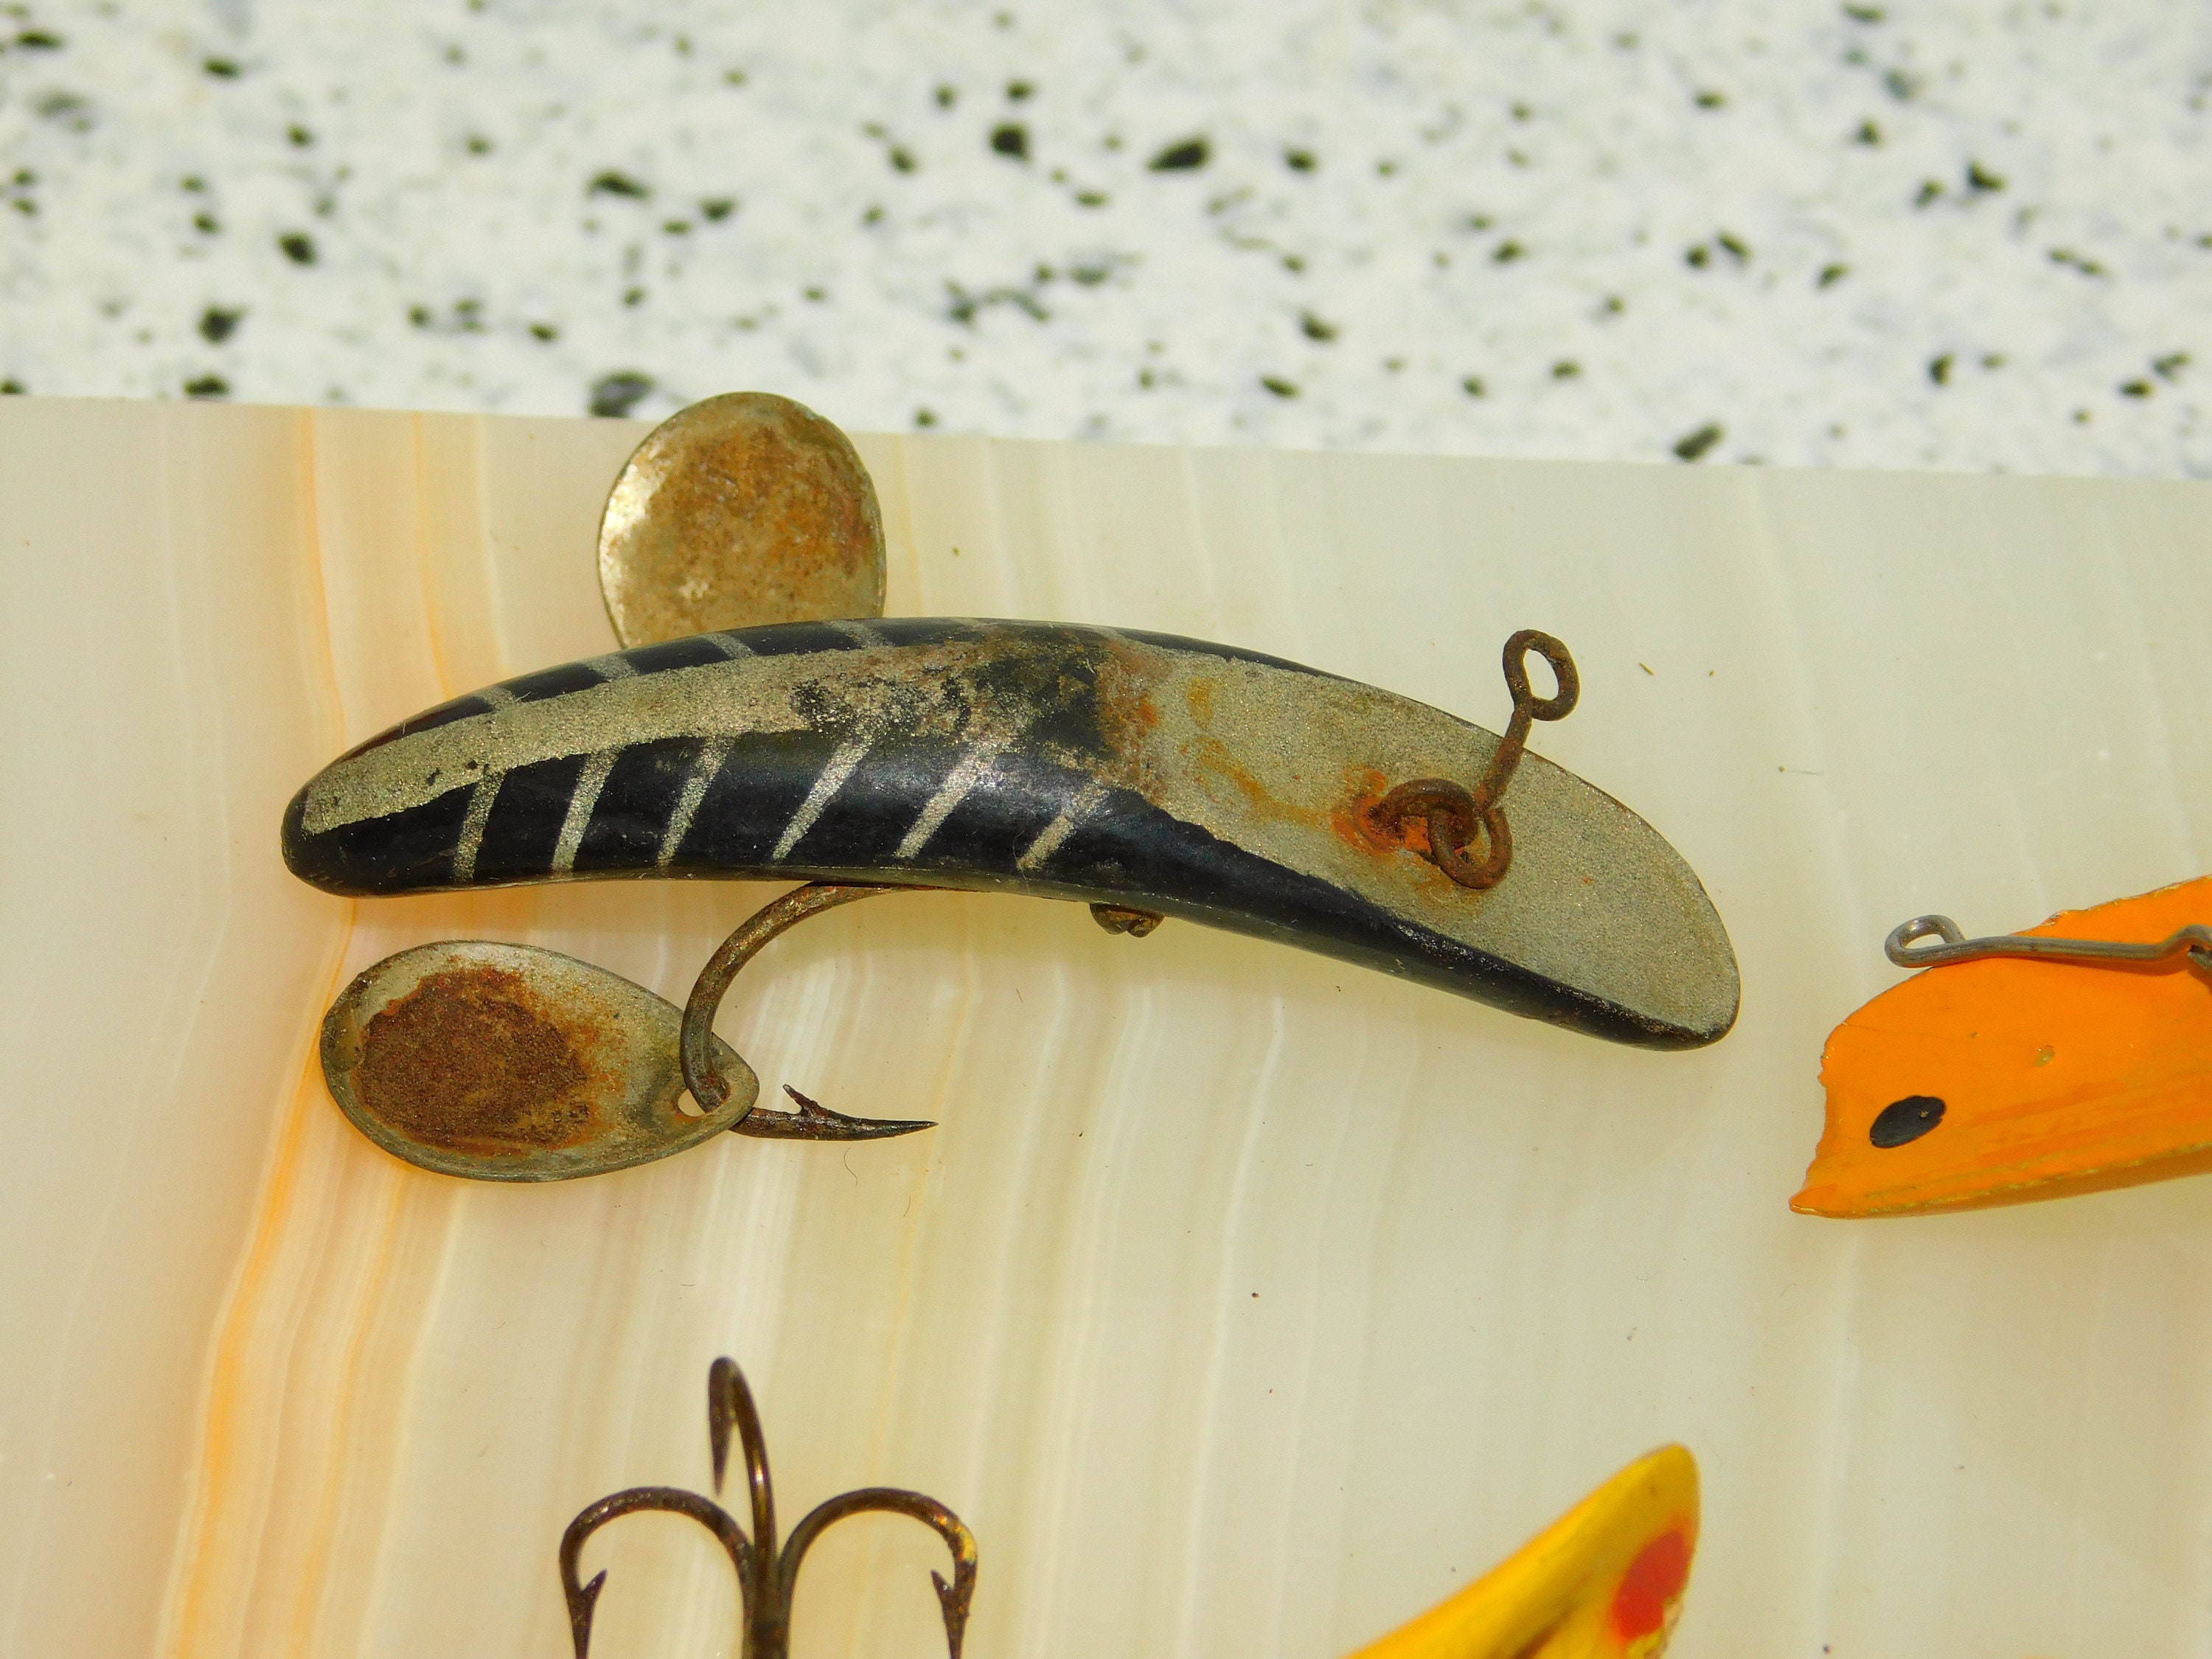 Lot Vintage Fishing Lures Helin Flatfish Fly Fishing Bait Wood Carved /  Bakelite Vintage Fishing Tackle Lot F5, F6, NO Boxes -  Canada